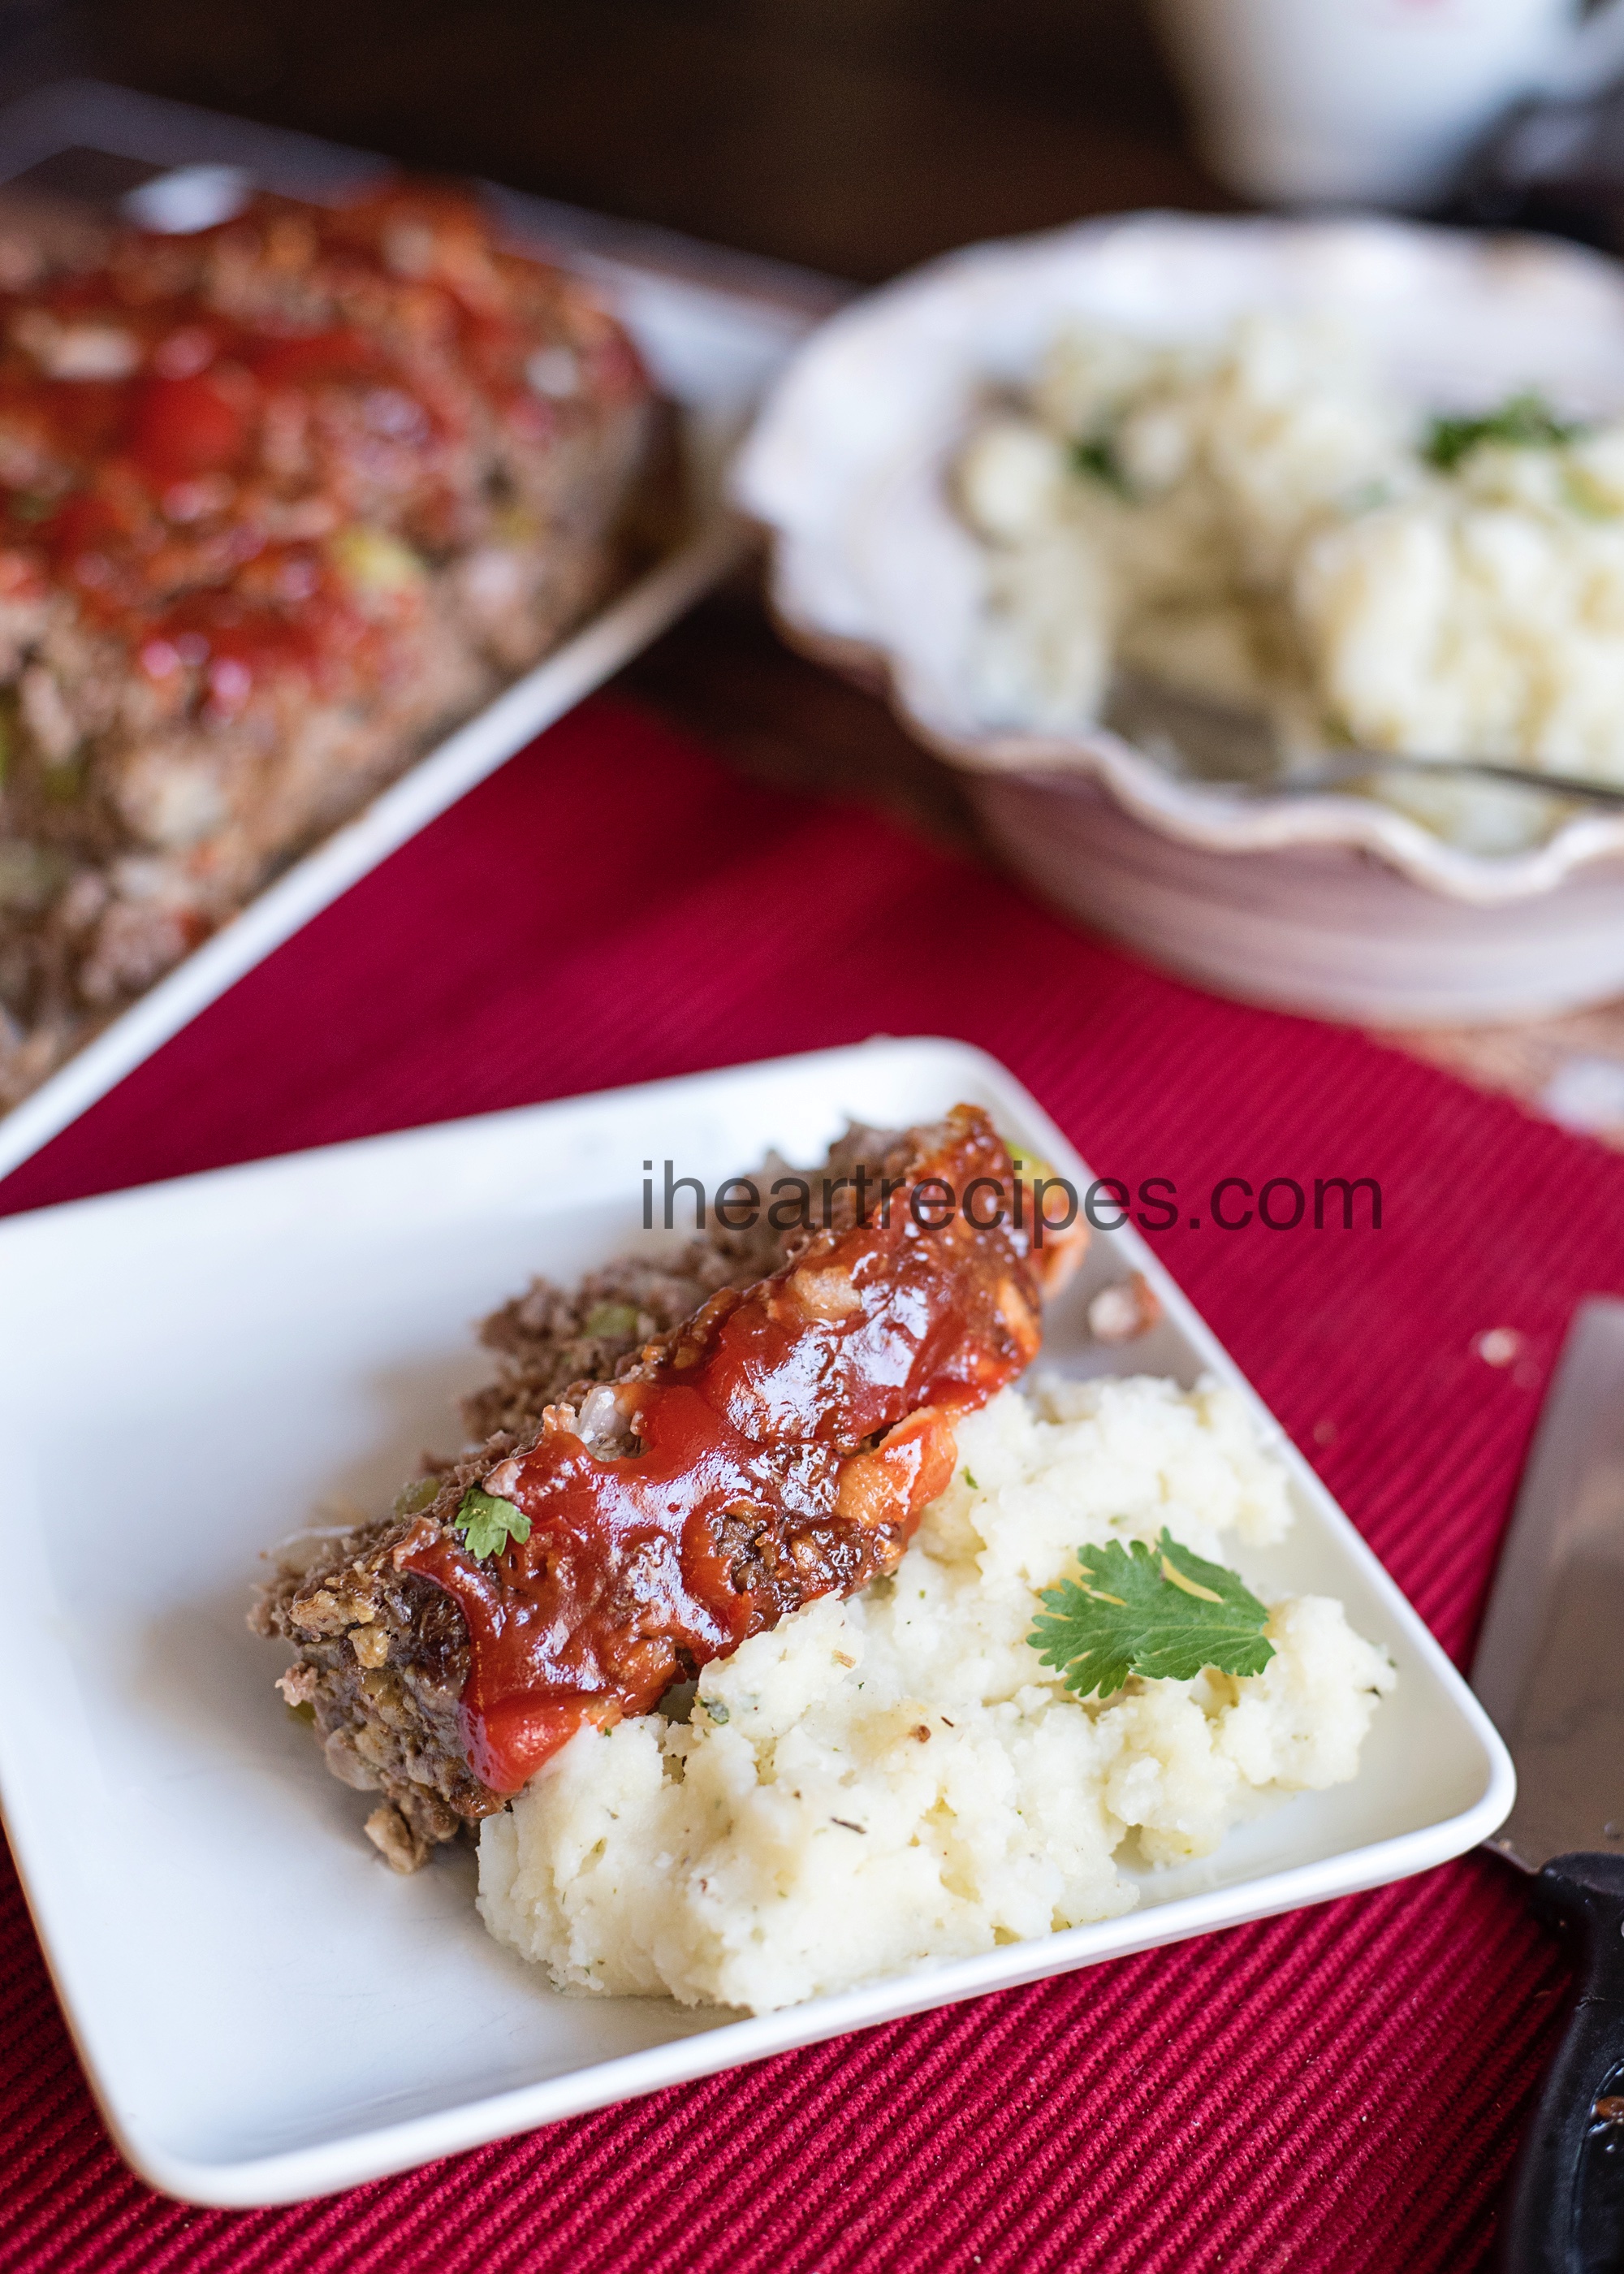 A slice of classic meatloaf served on a bed of creamy mashed potatoes.